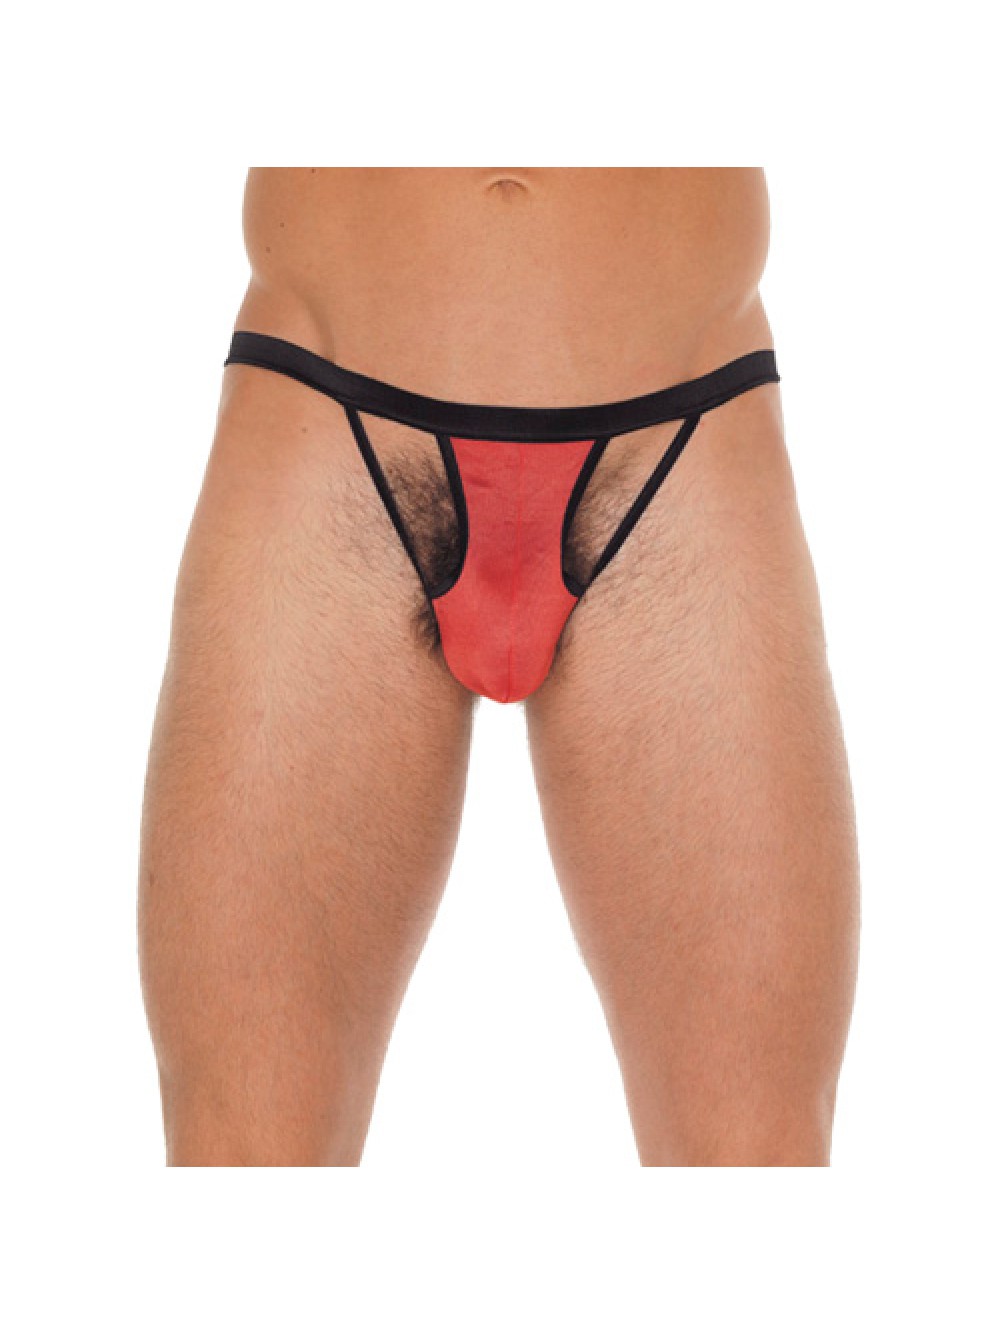 Mens Black G-String With Red Pouch